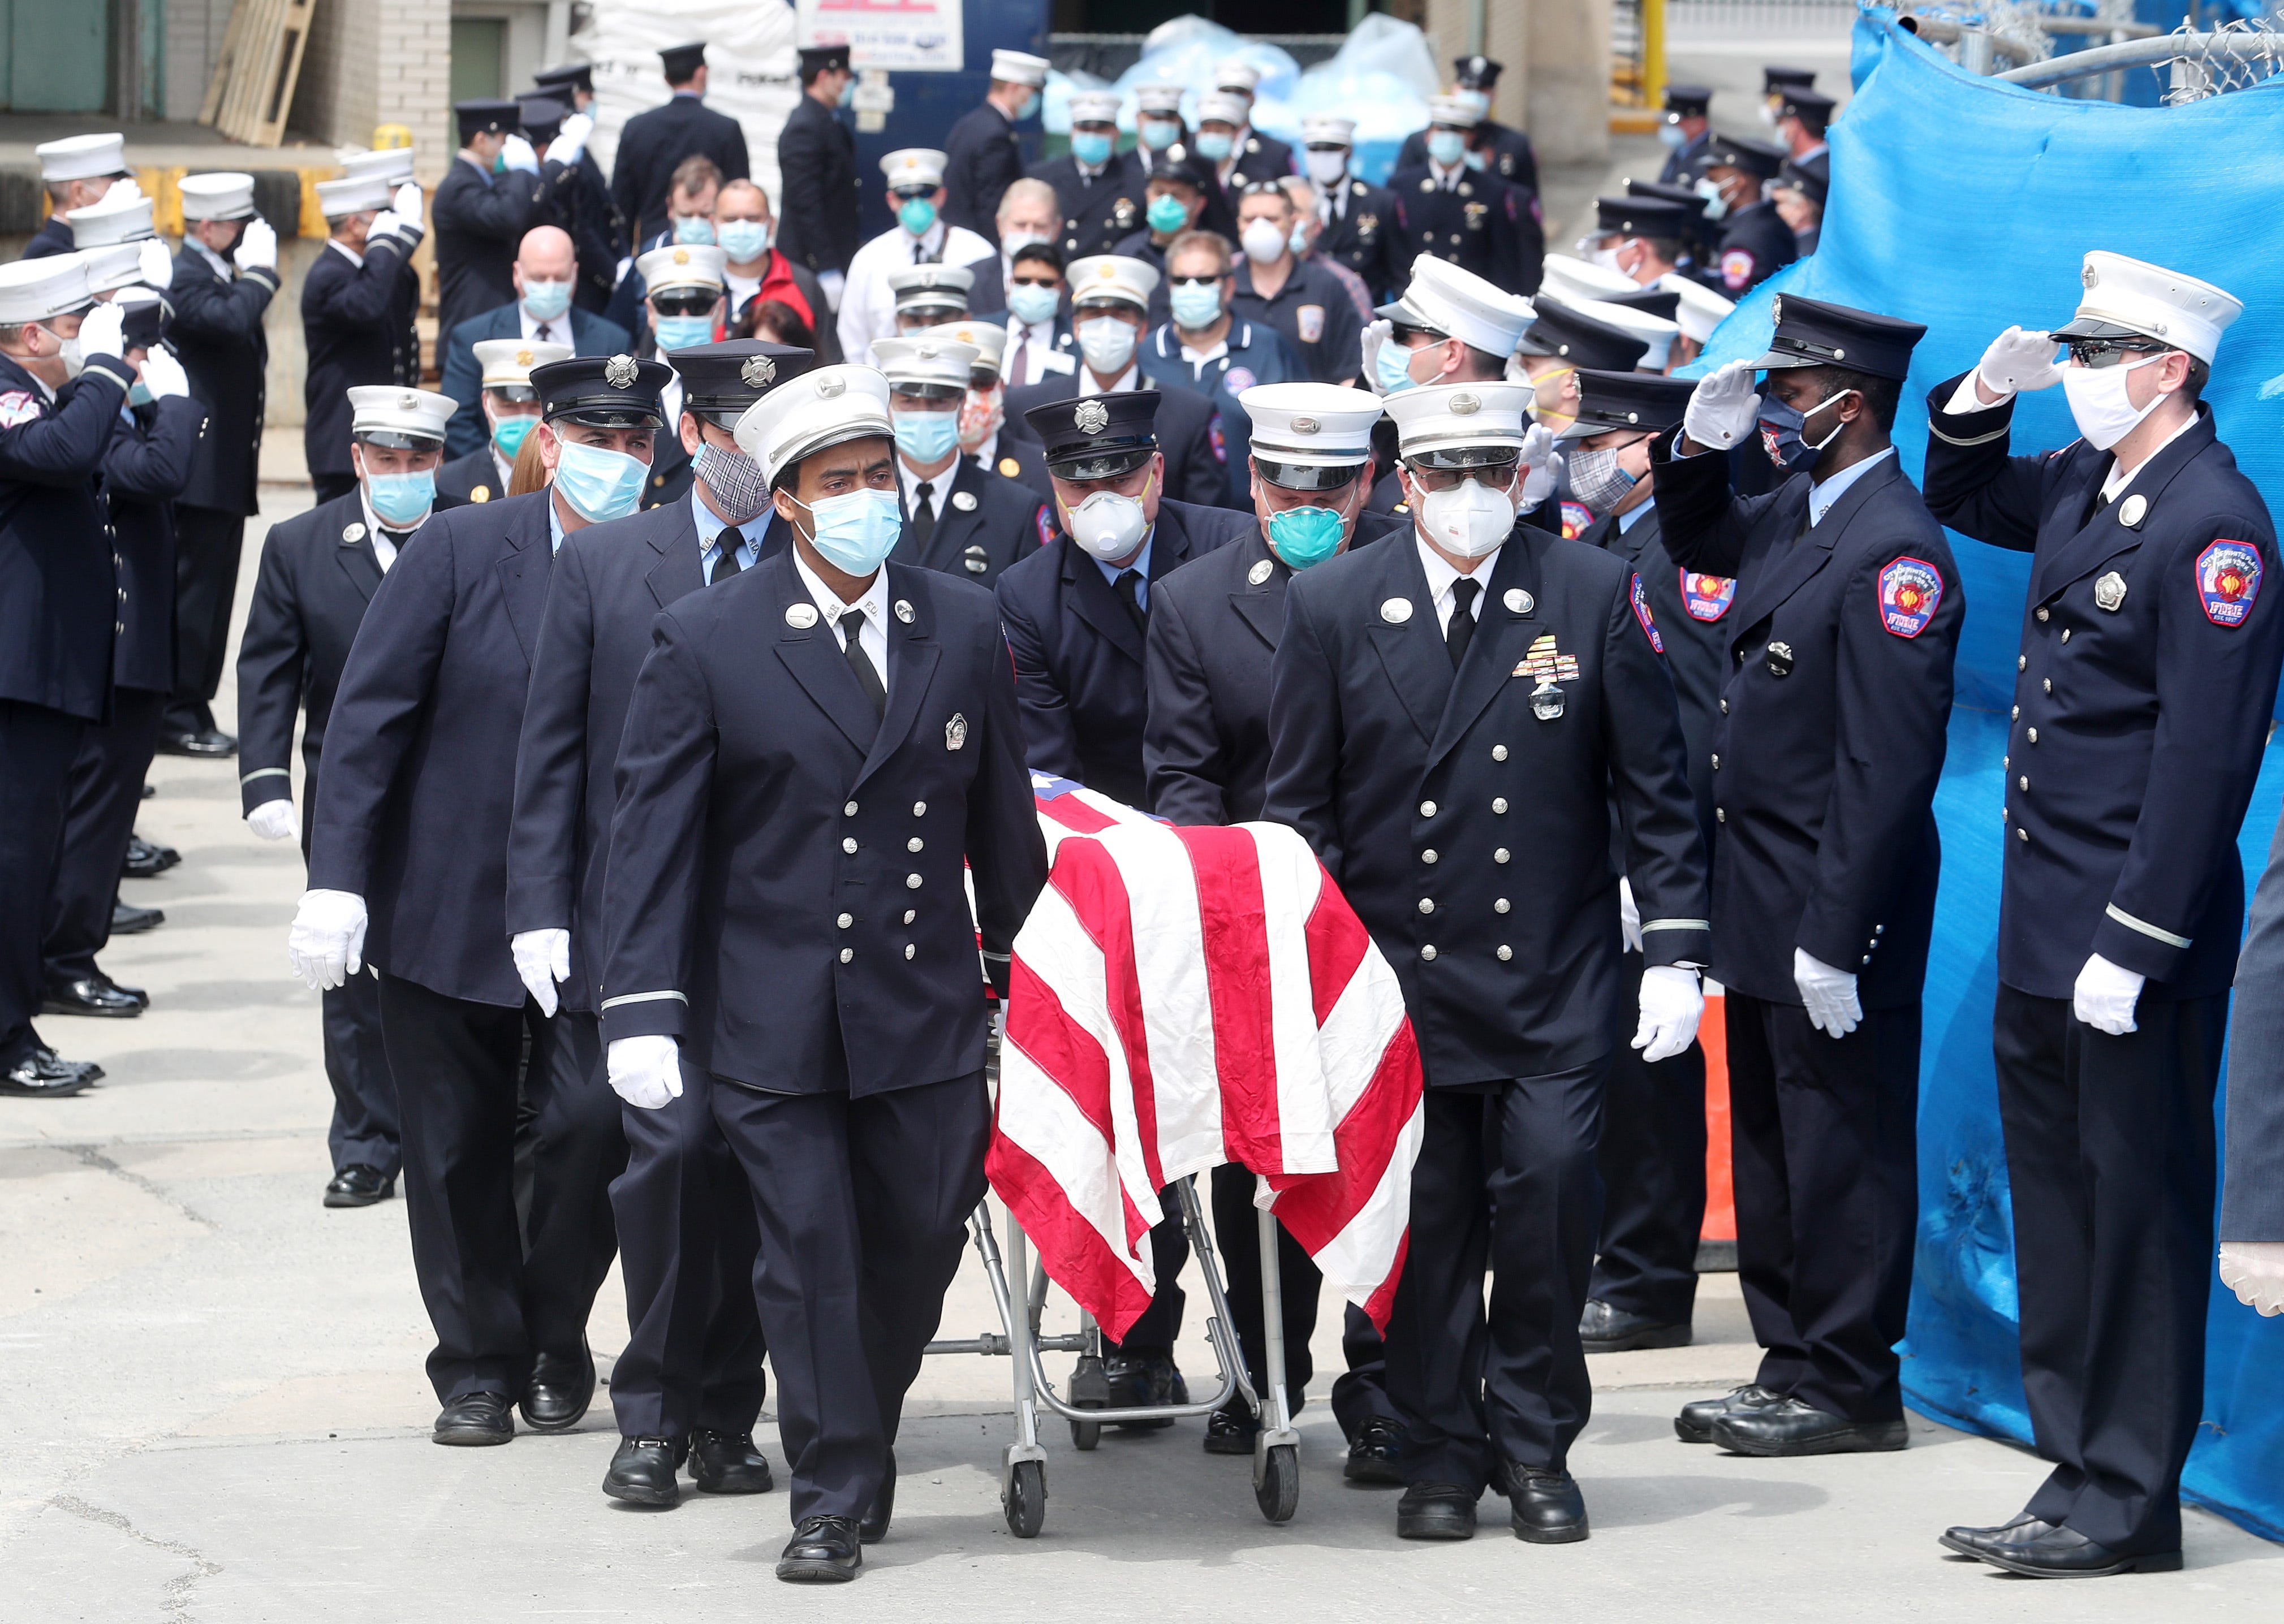 White Plains firefighters carry the flag draped body of their brother Deputy Chief Edward Ciocca from White Plains Hospital May 3, 2020. Ciocca, a 35-year veteran of the White Plains Fire Department, died Saturday due to complications from COVID-19.